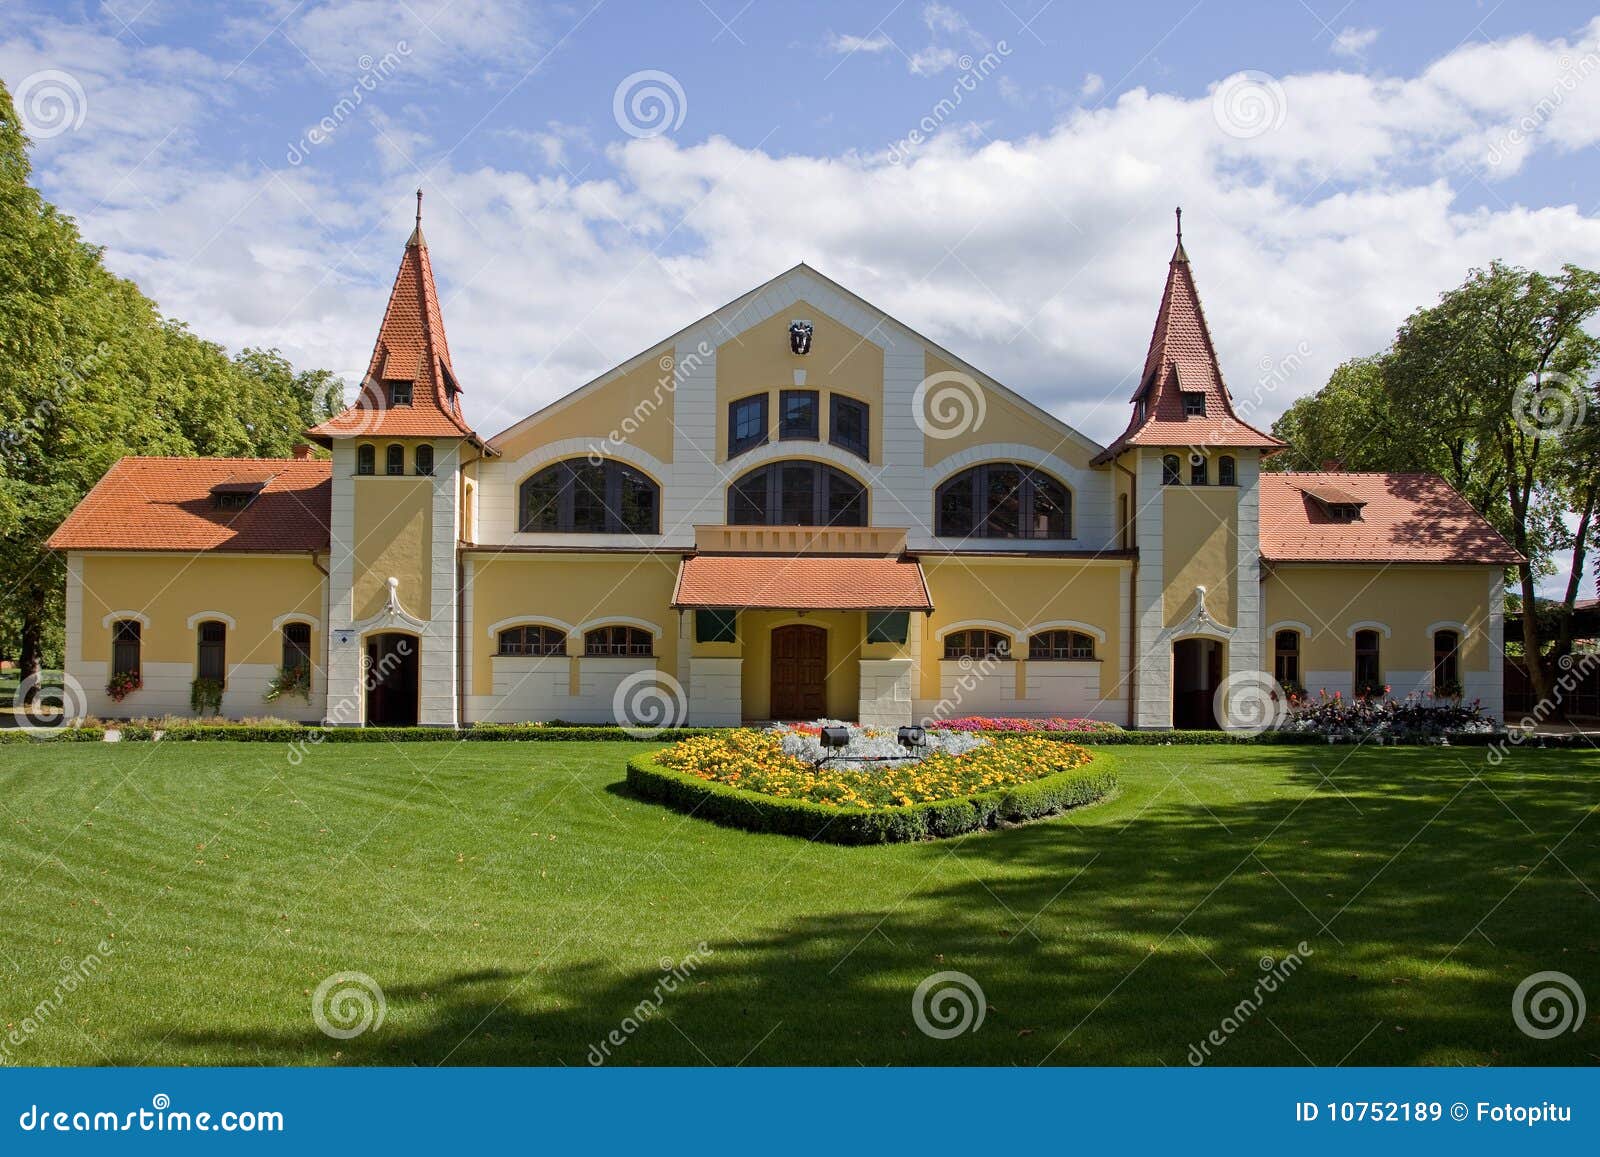 Stud farm stock image. Image of agriculture, livery, topo - 10752189